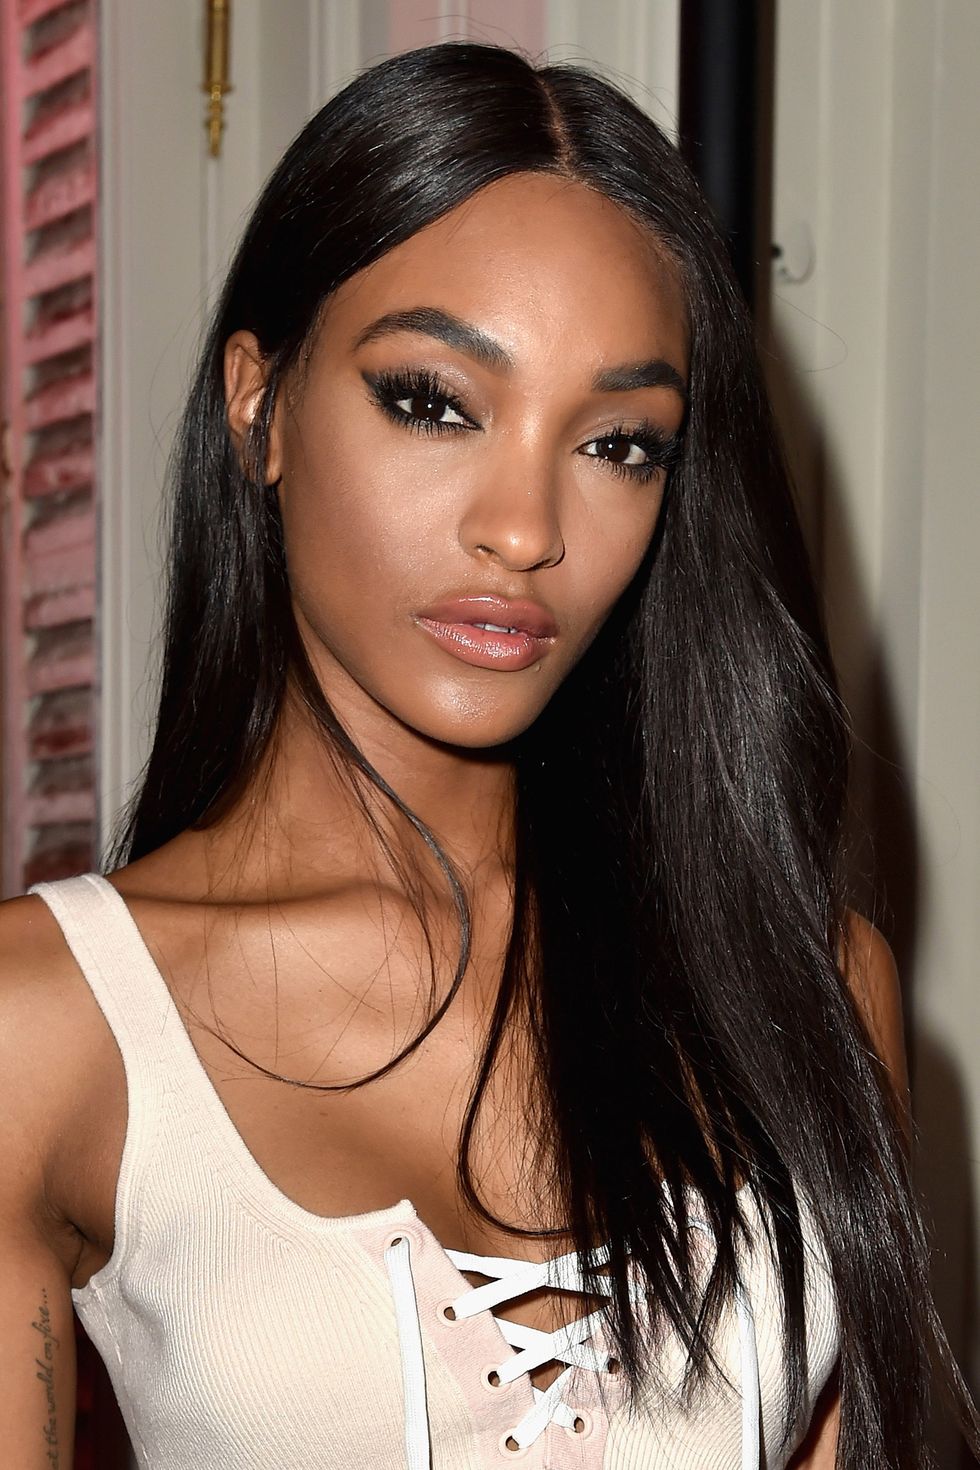 Daily beauty muse: celebrity hair and make-up inspiration